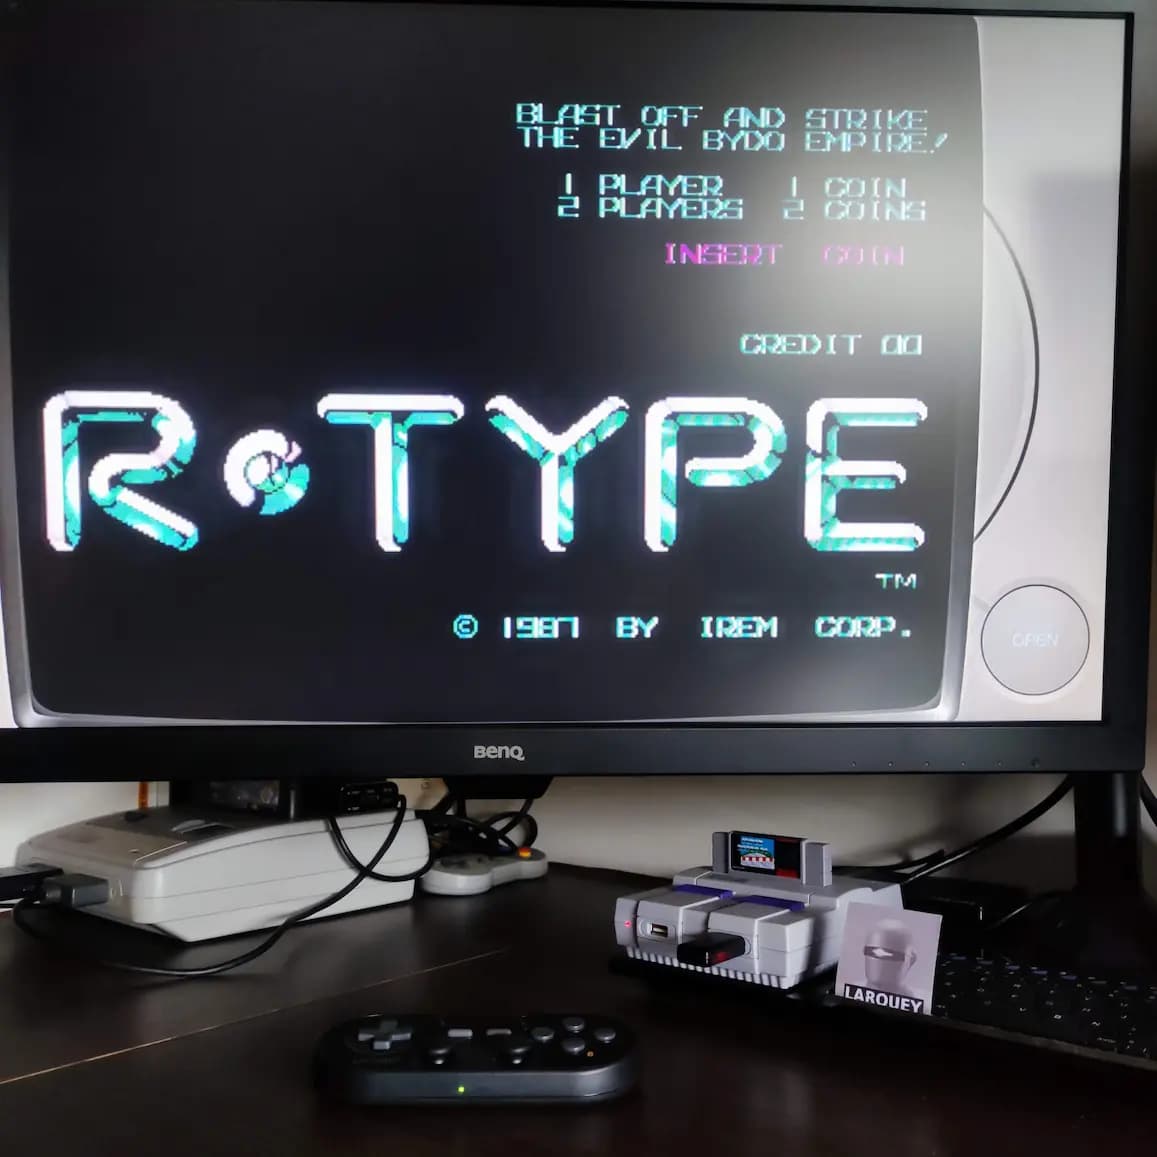 Larquey: R-Types: R-Type [3 Lives/Normal] (Playstation 1 Emulated) 85,500 points on 2022-09-04 06:22:43